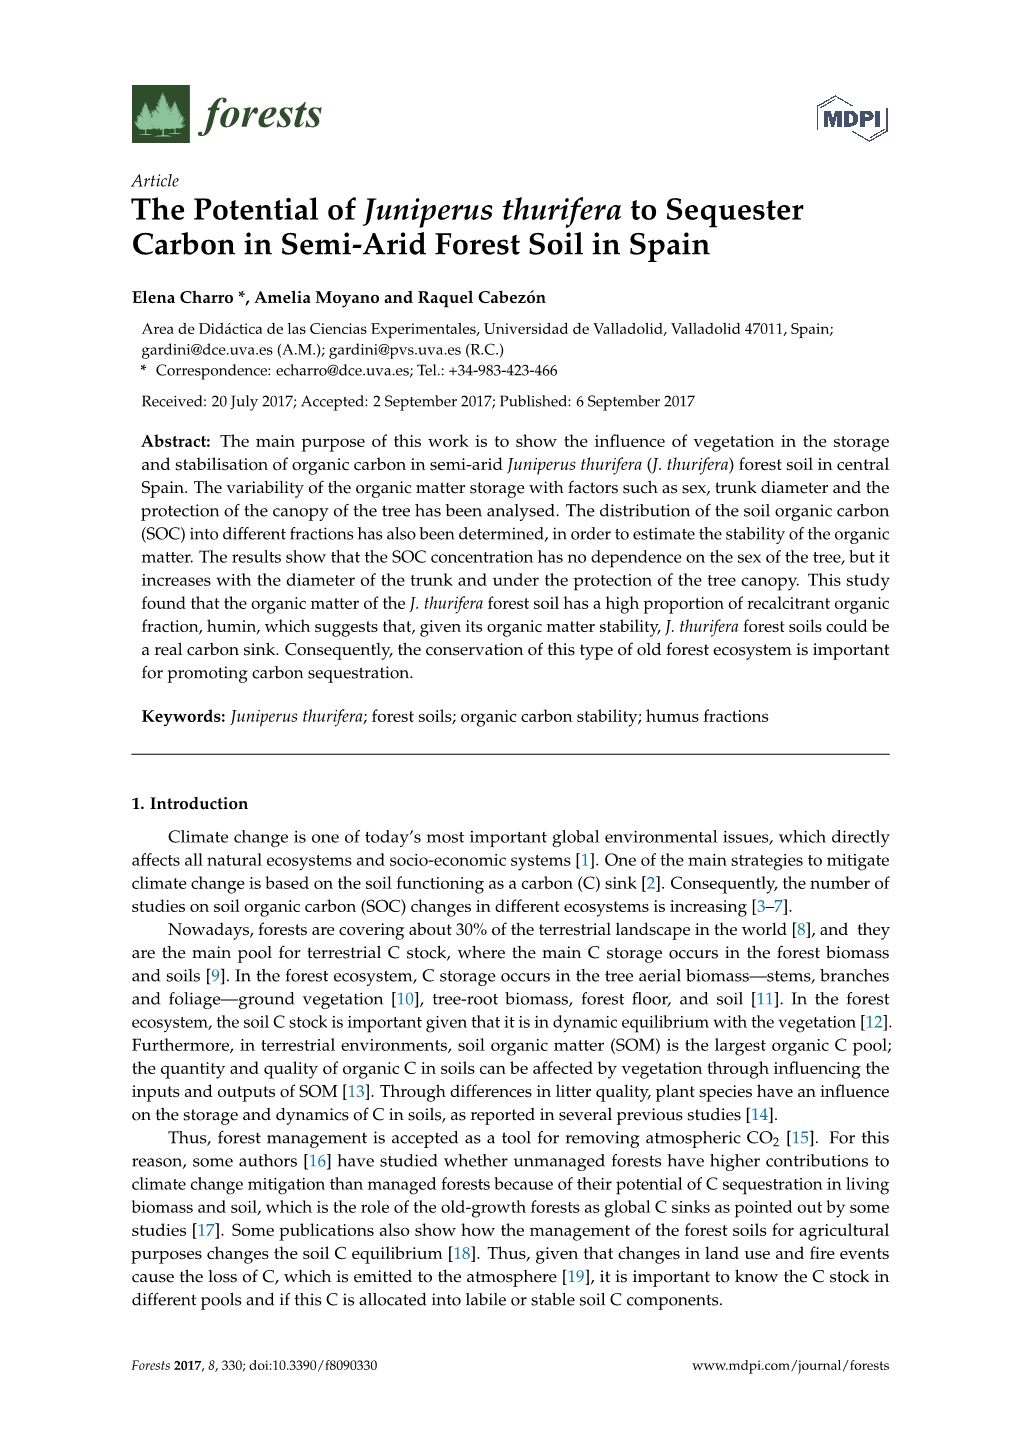 The Potential of Juniperus Thurifera to Sequester Carbon in Semi-Arid Forest Soil in Spain